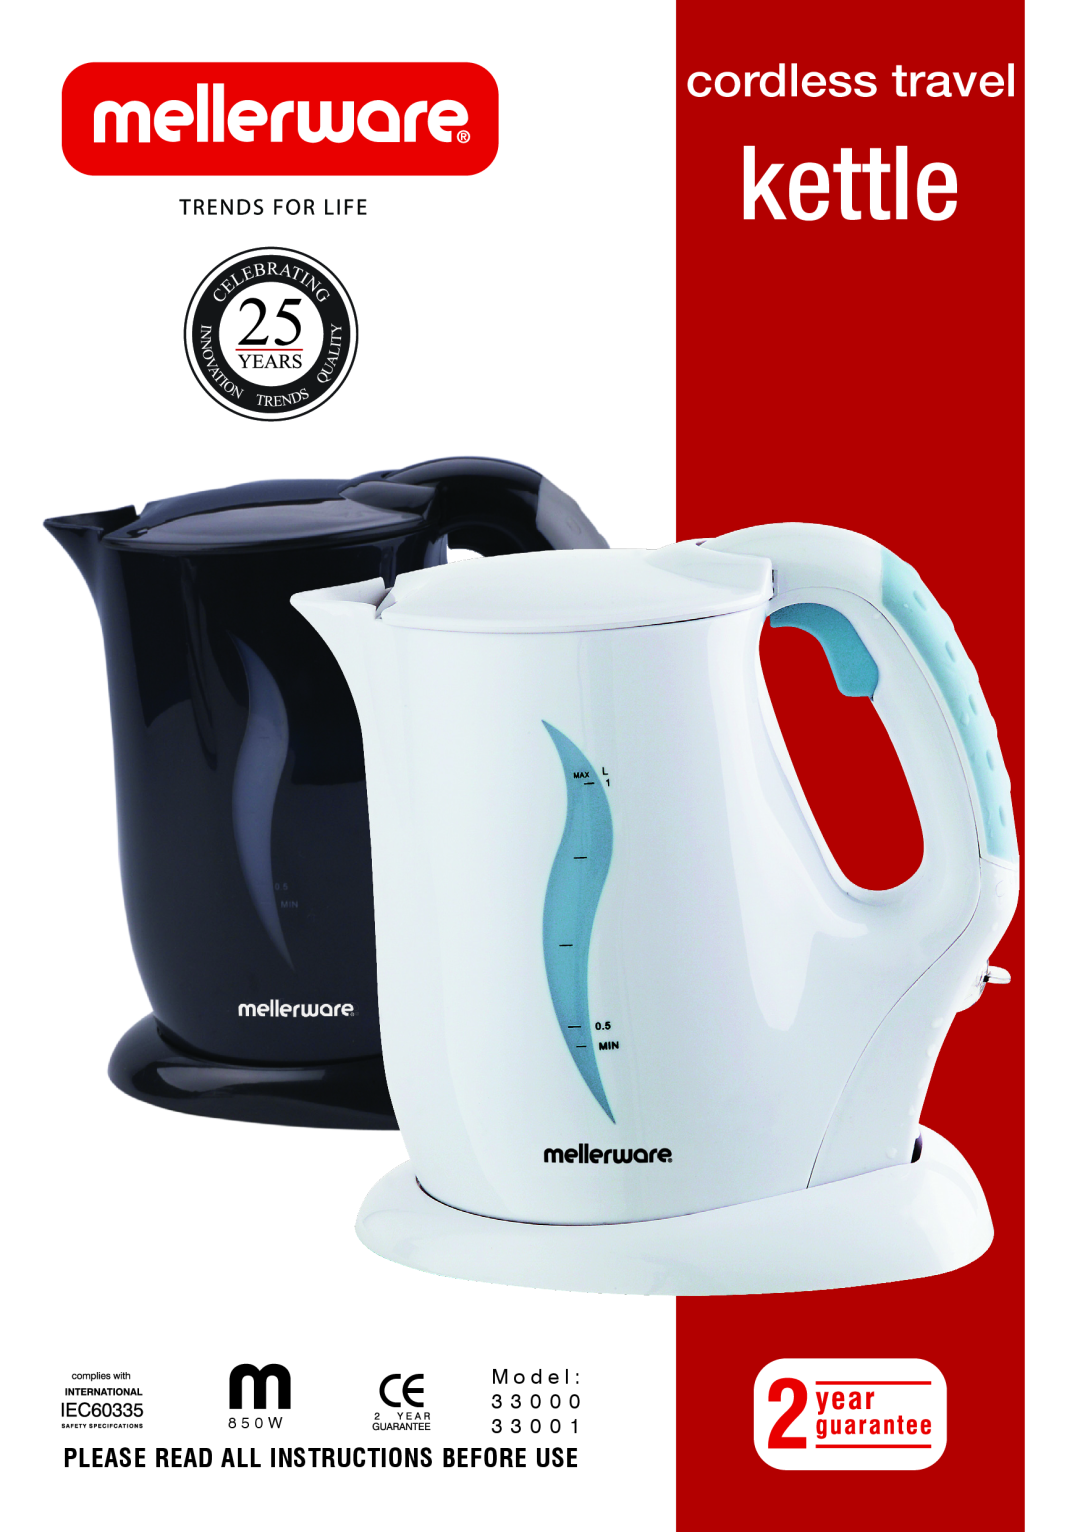 Mellerware 3 3 0 0 1, 3 3 0 0 0 manual kettle, cordless travel, Please Read All Instructions Before Use, 8 5 0 W 